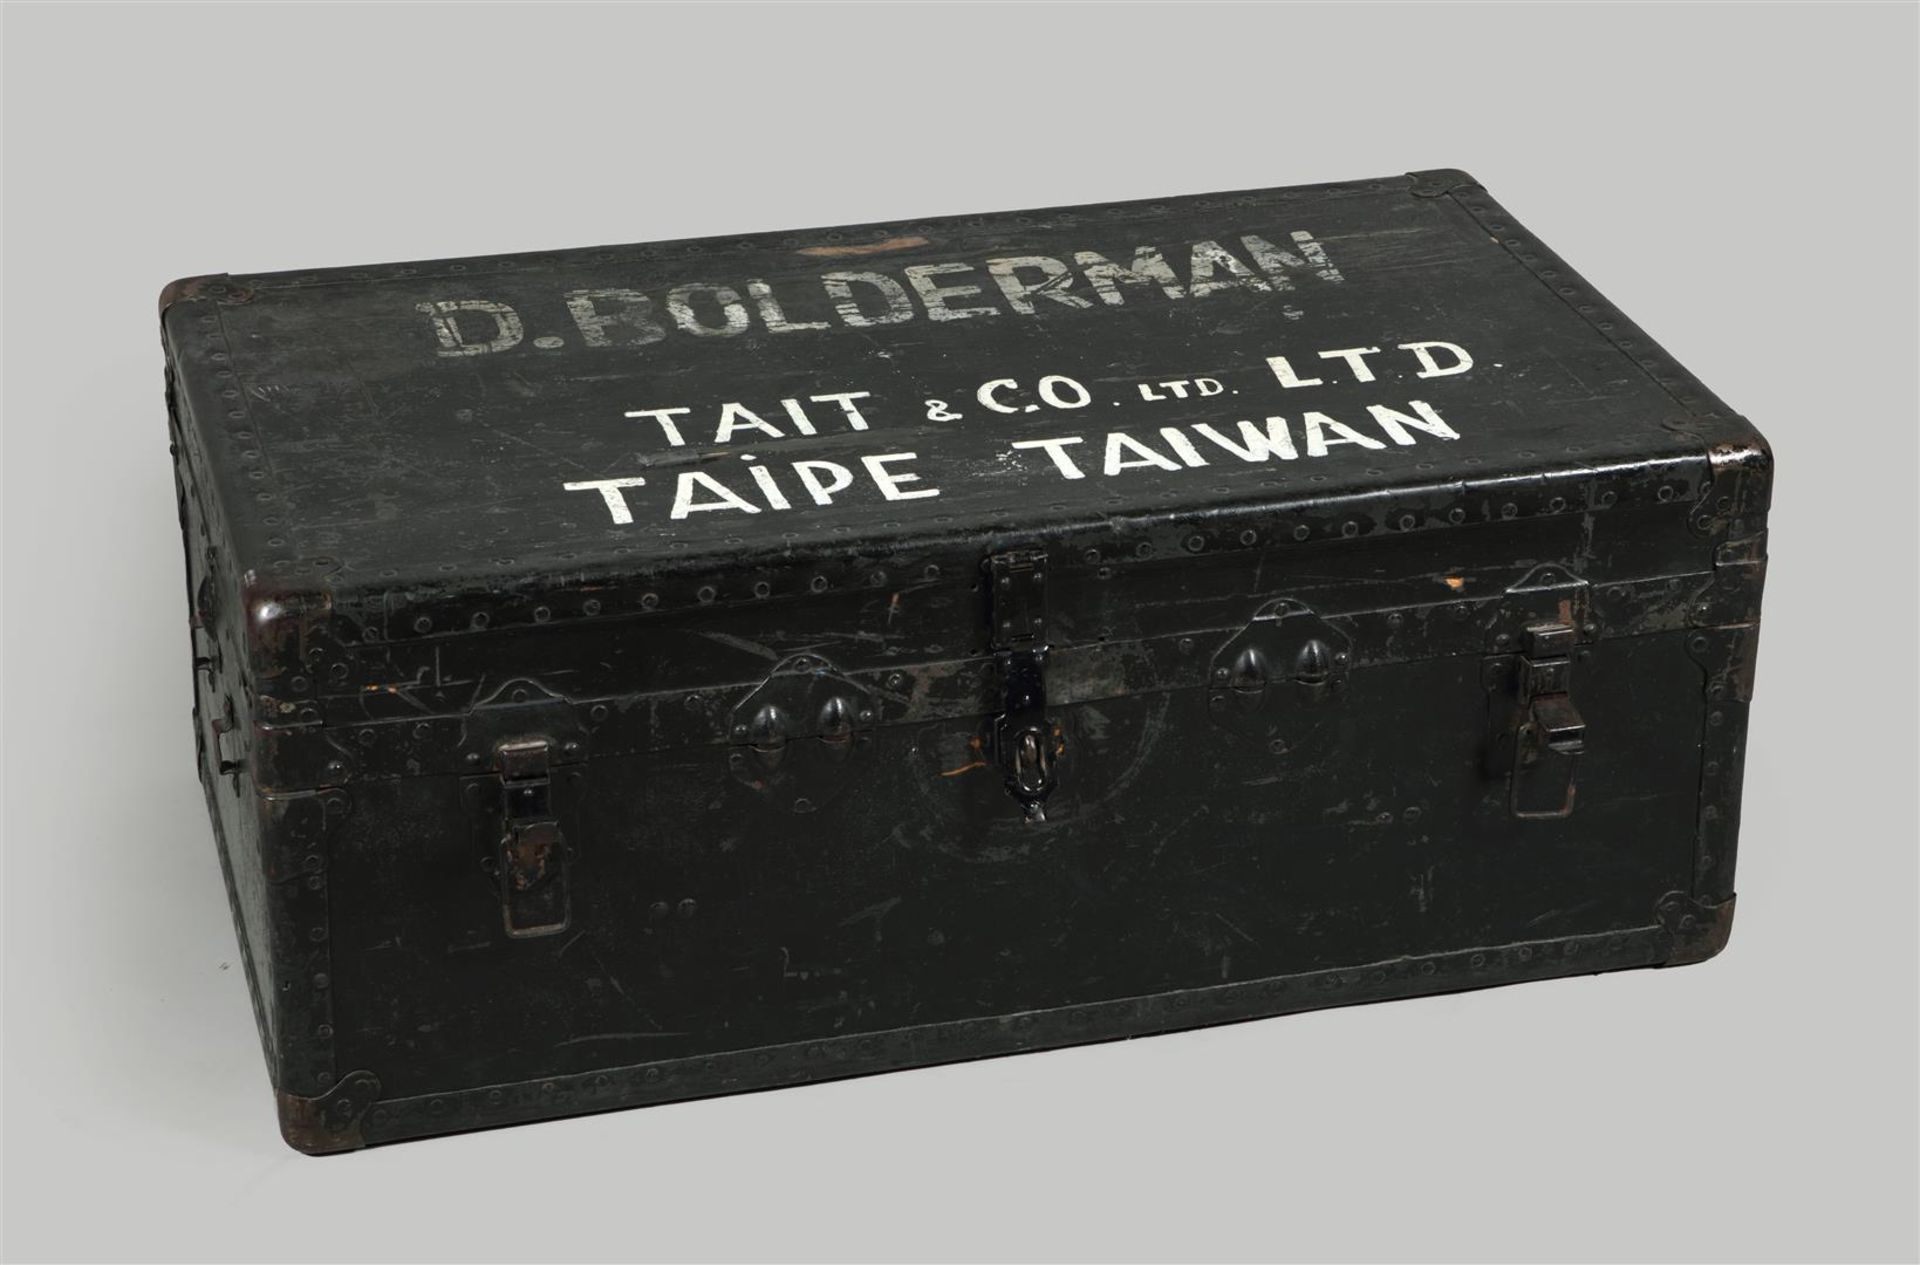 An old travel chest with the inscription "D.Bolderman Tait 